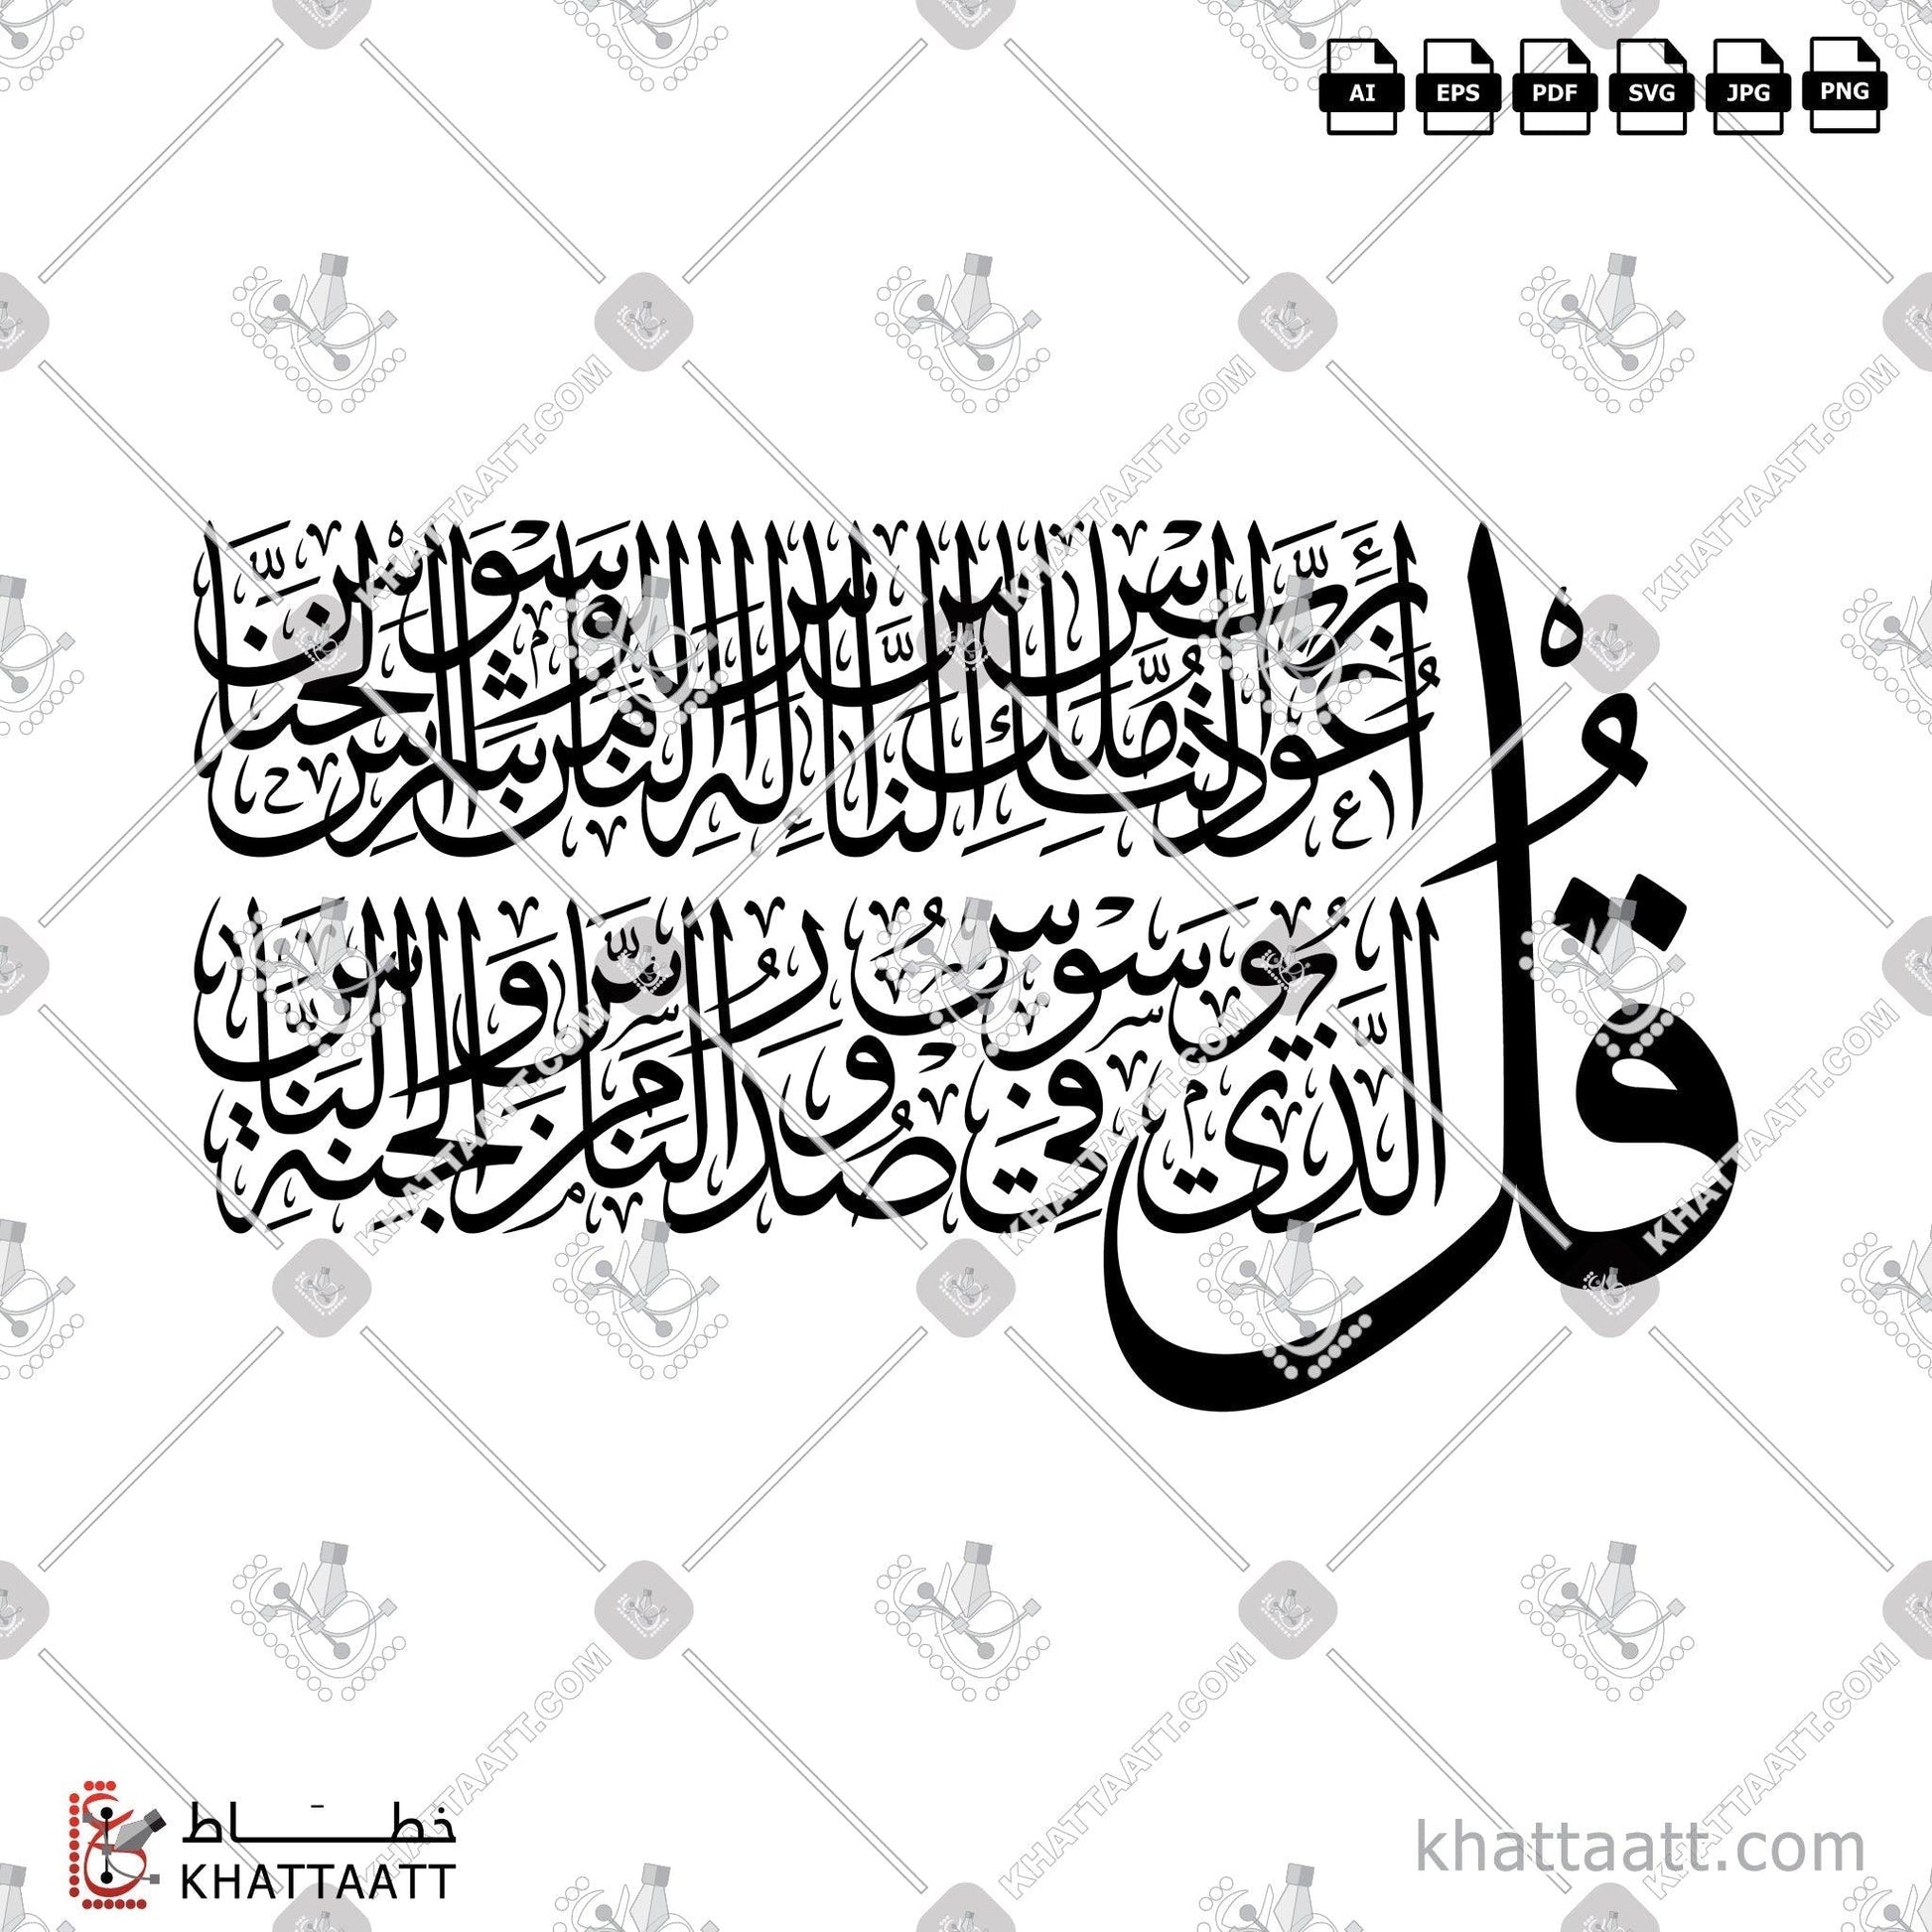 Download Arabic Calligraphy of Surat An-Naas - سورة الناس in Thuluth - خط الثلث in vector and .png